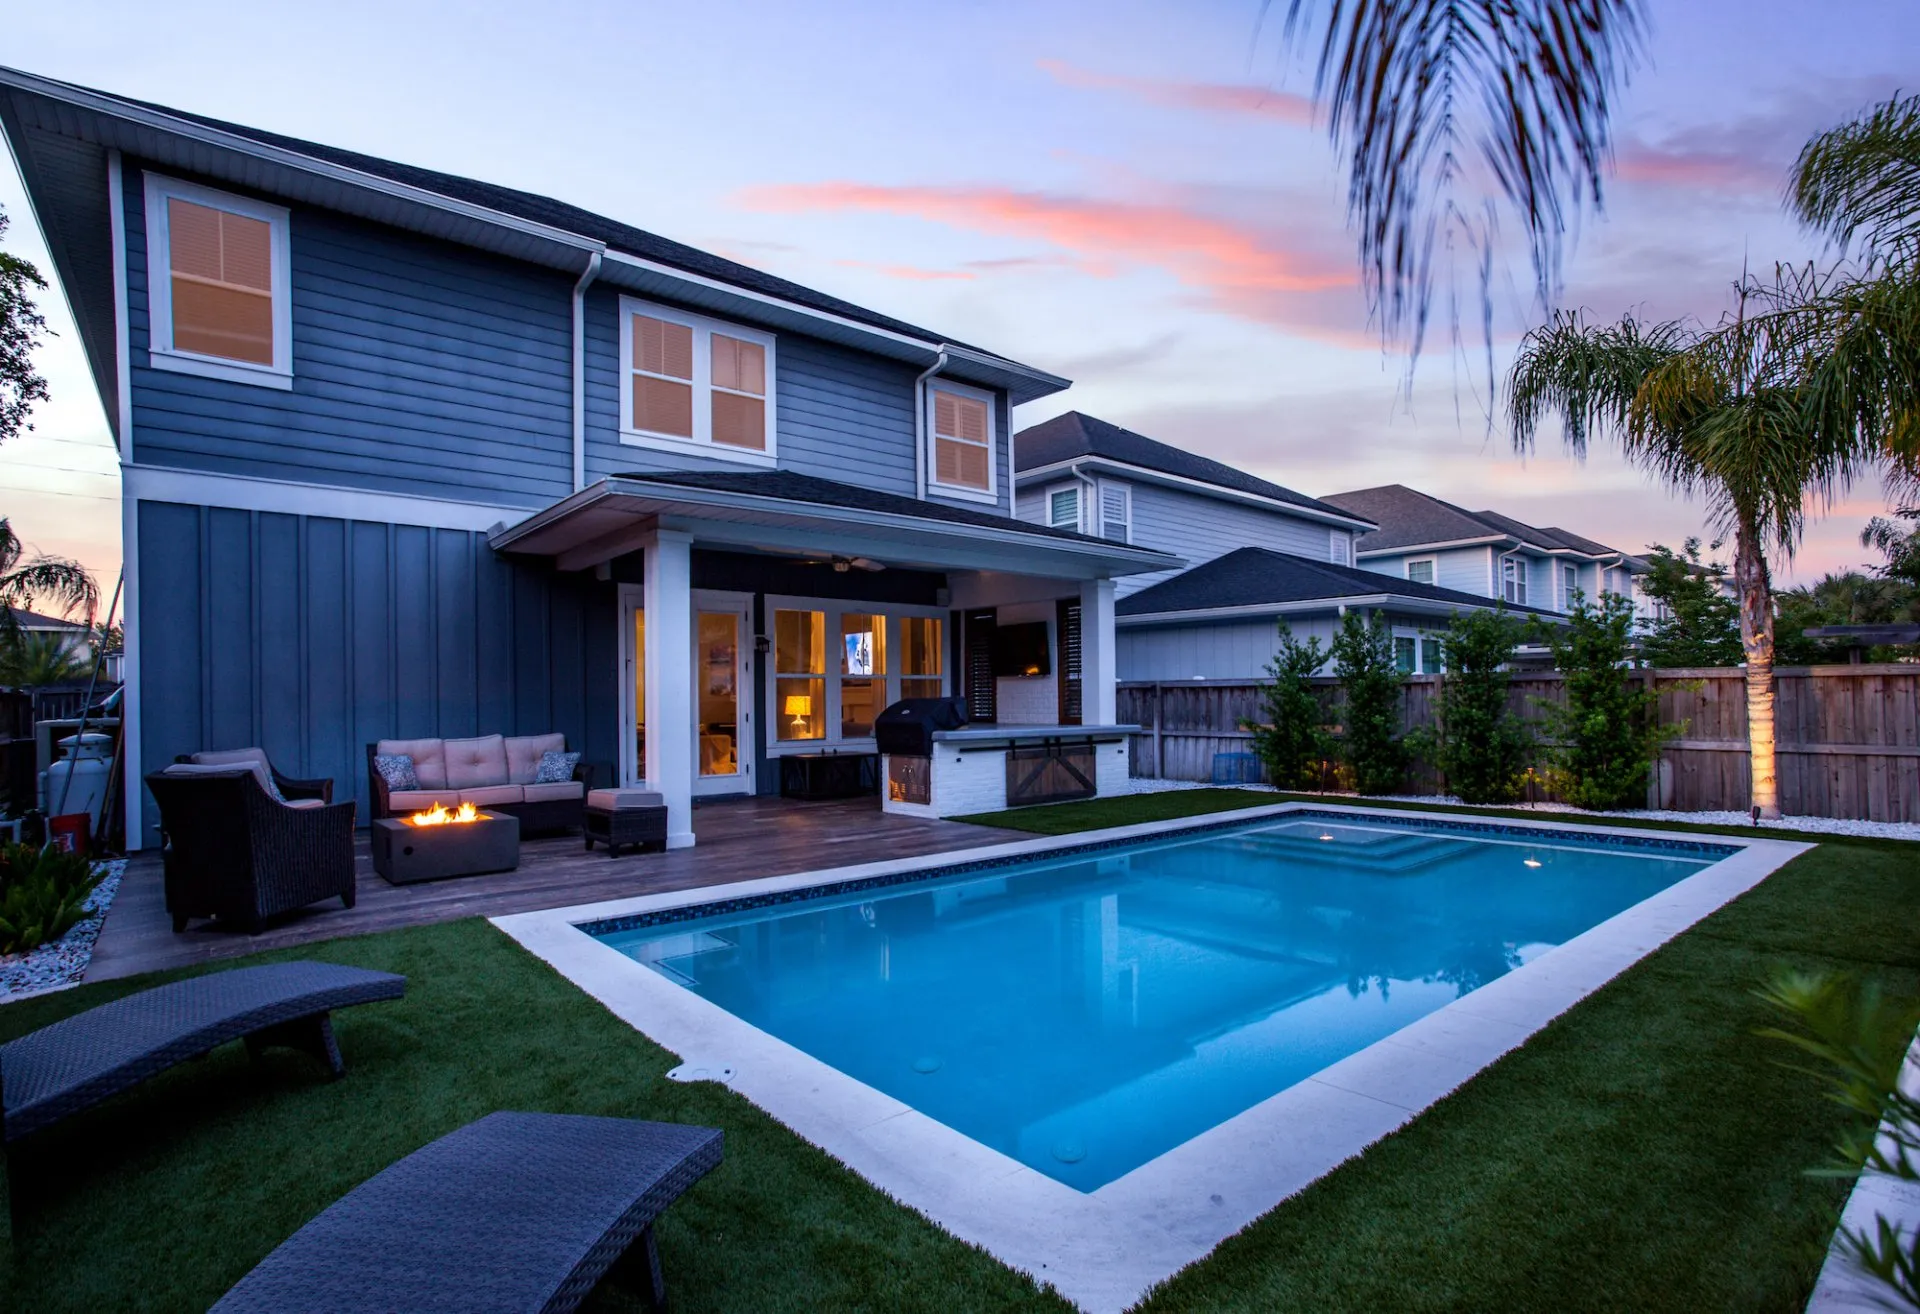 A serene backyard in Scottsdale, AZ features a two-story blue house with white trim, a covered patio with outdoor furniture, and a fire pit. The focal point is a rectangular swimming pool surrounded by lush artificial grass. Palm trees and neighboring houses are visible in the background.